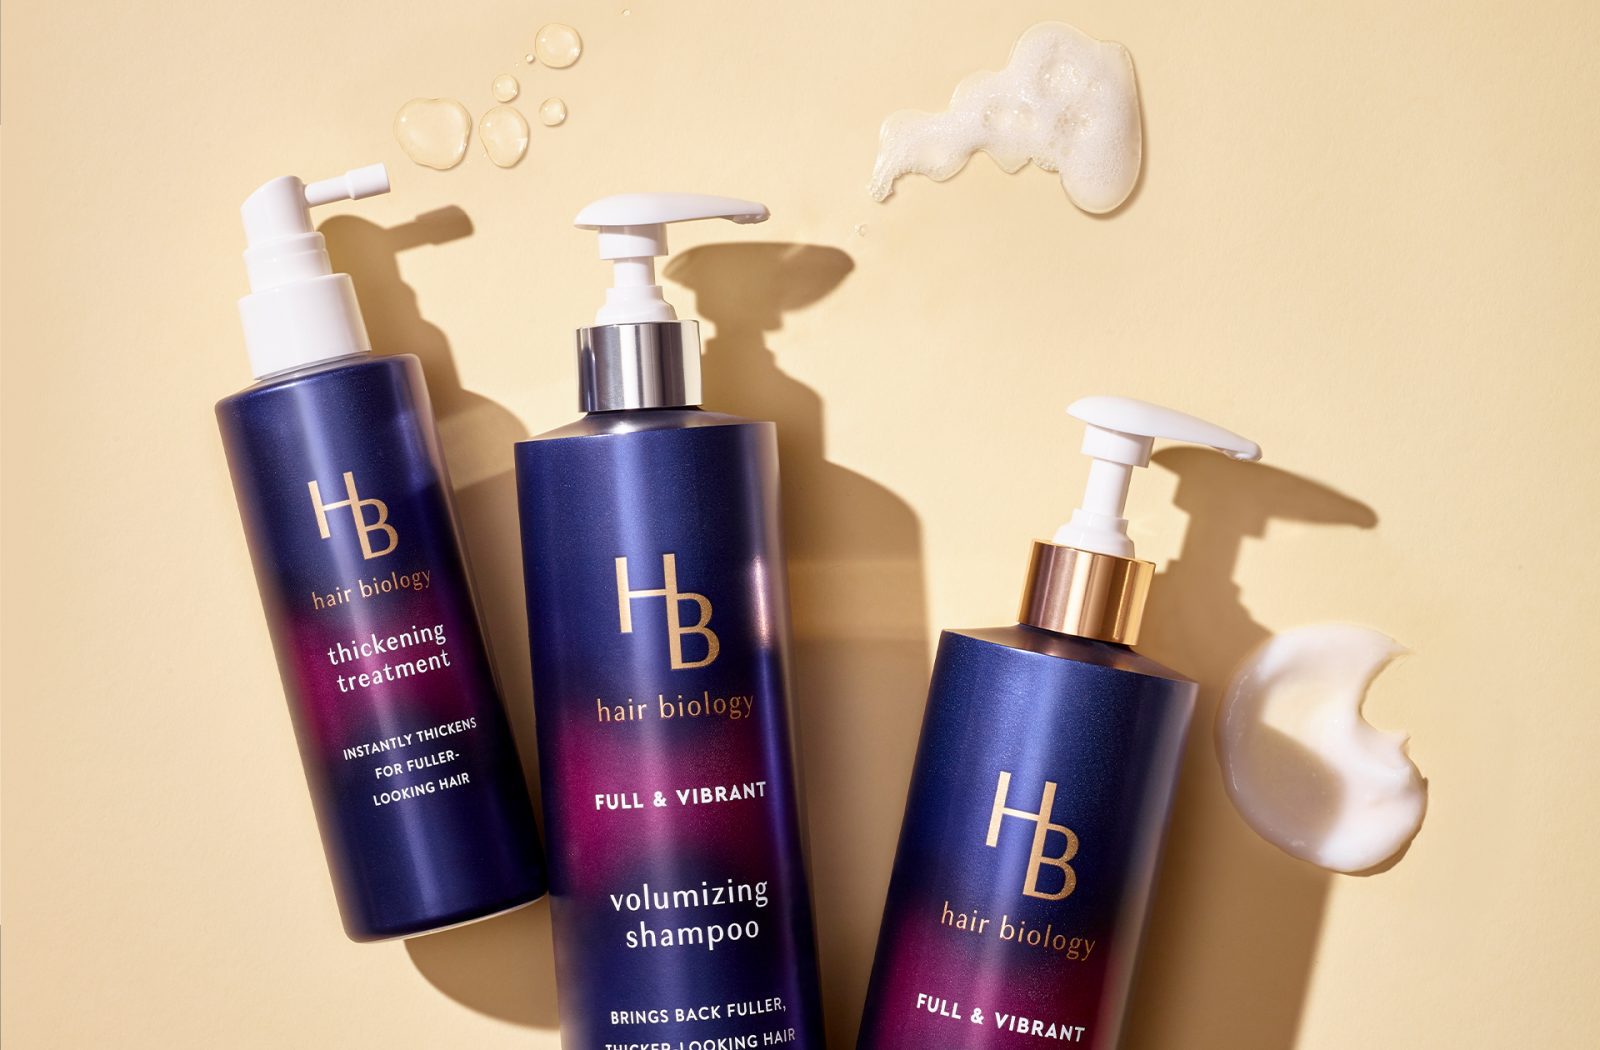 Product photography of three different Hair Biology hair care products, featuring packs created by a cpg packaging design agency.